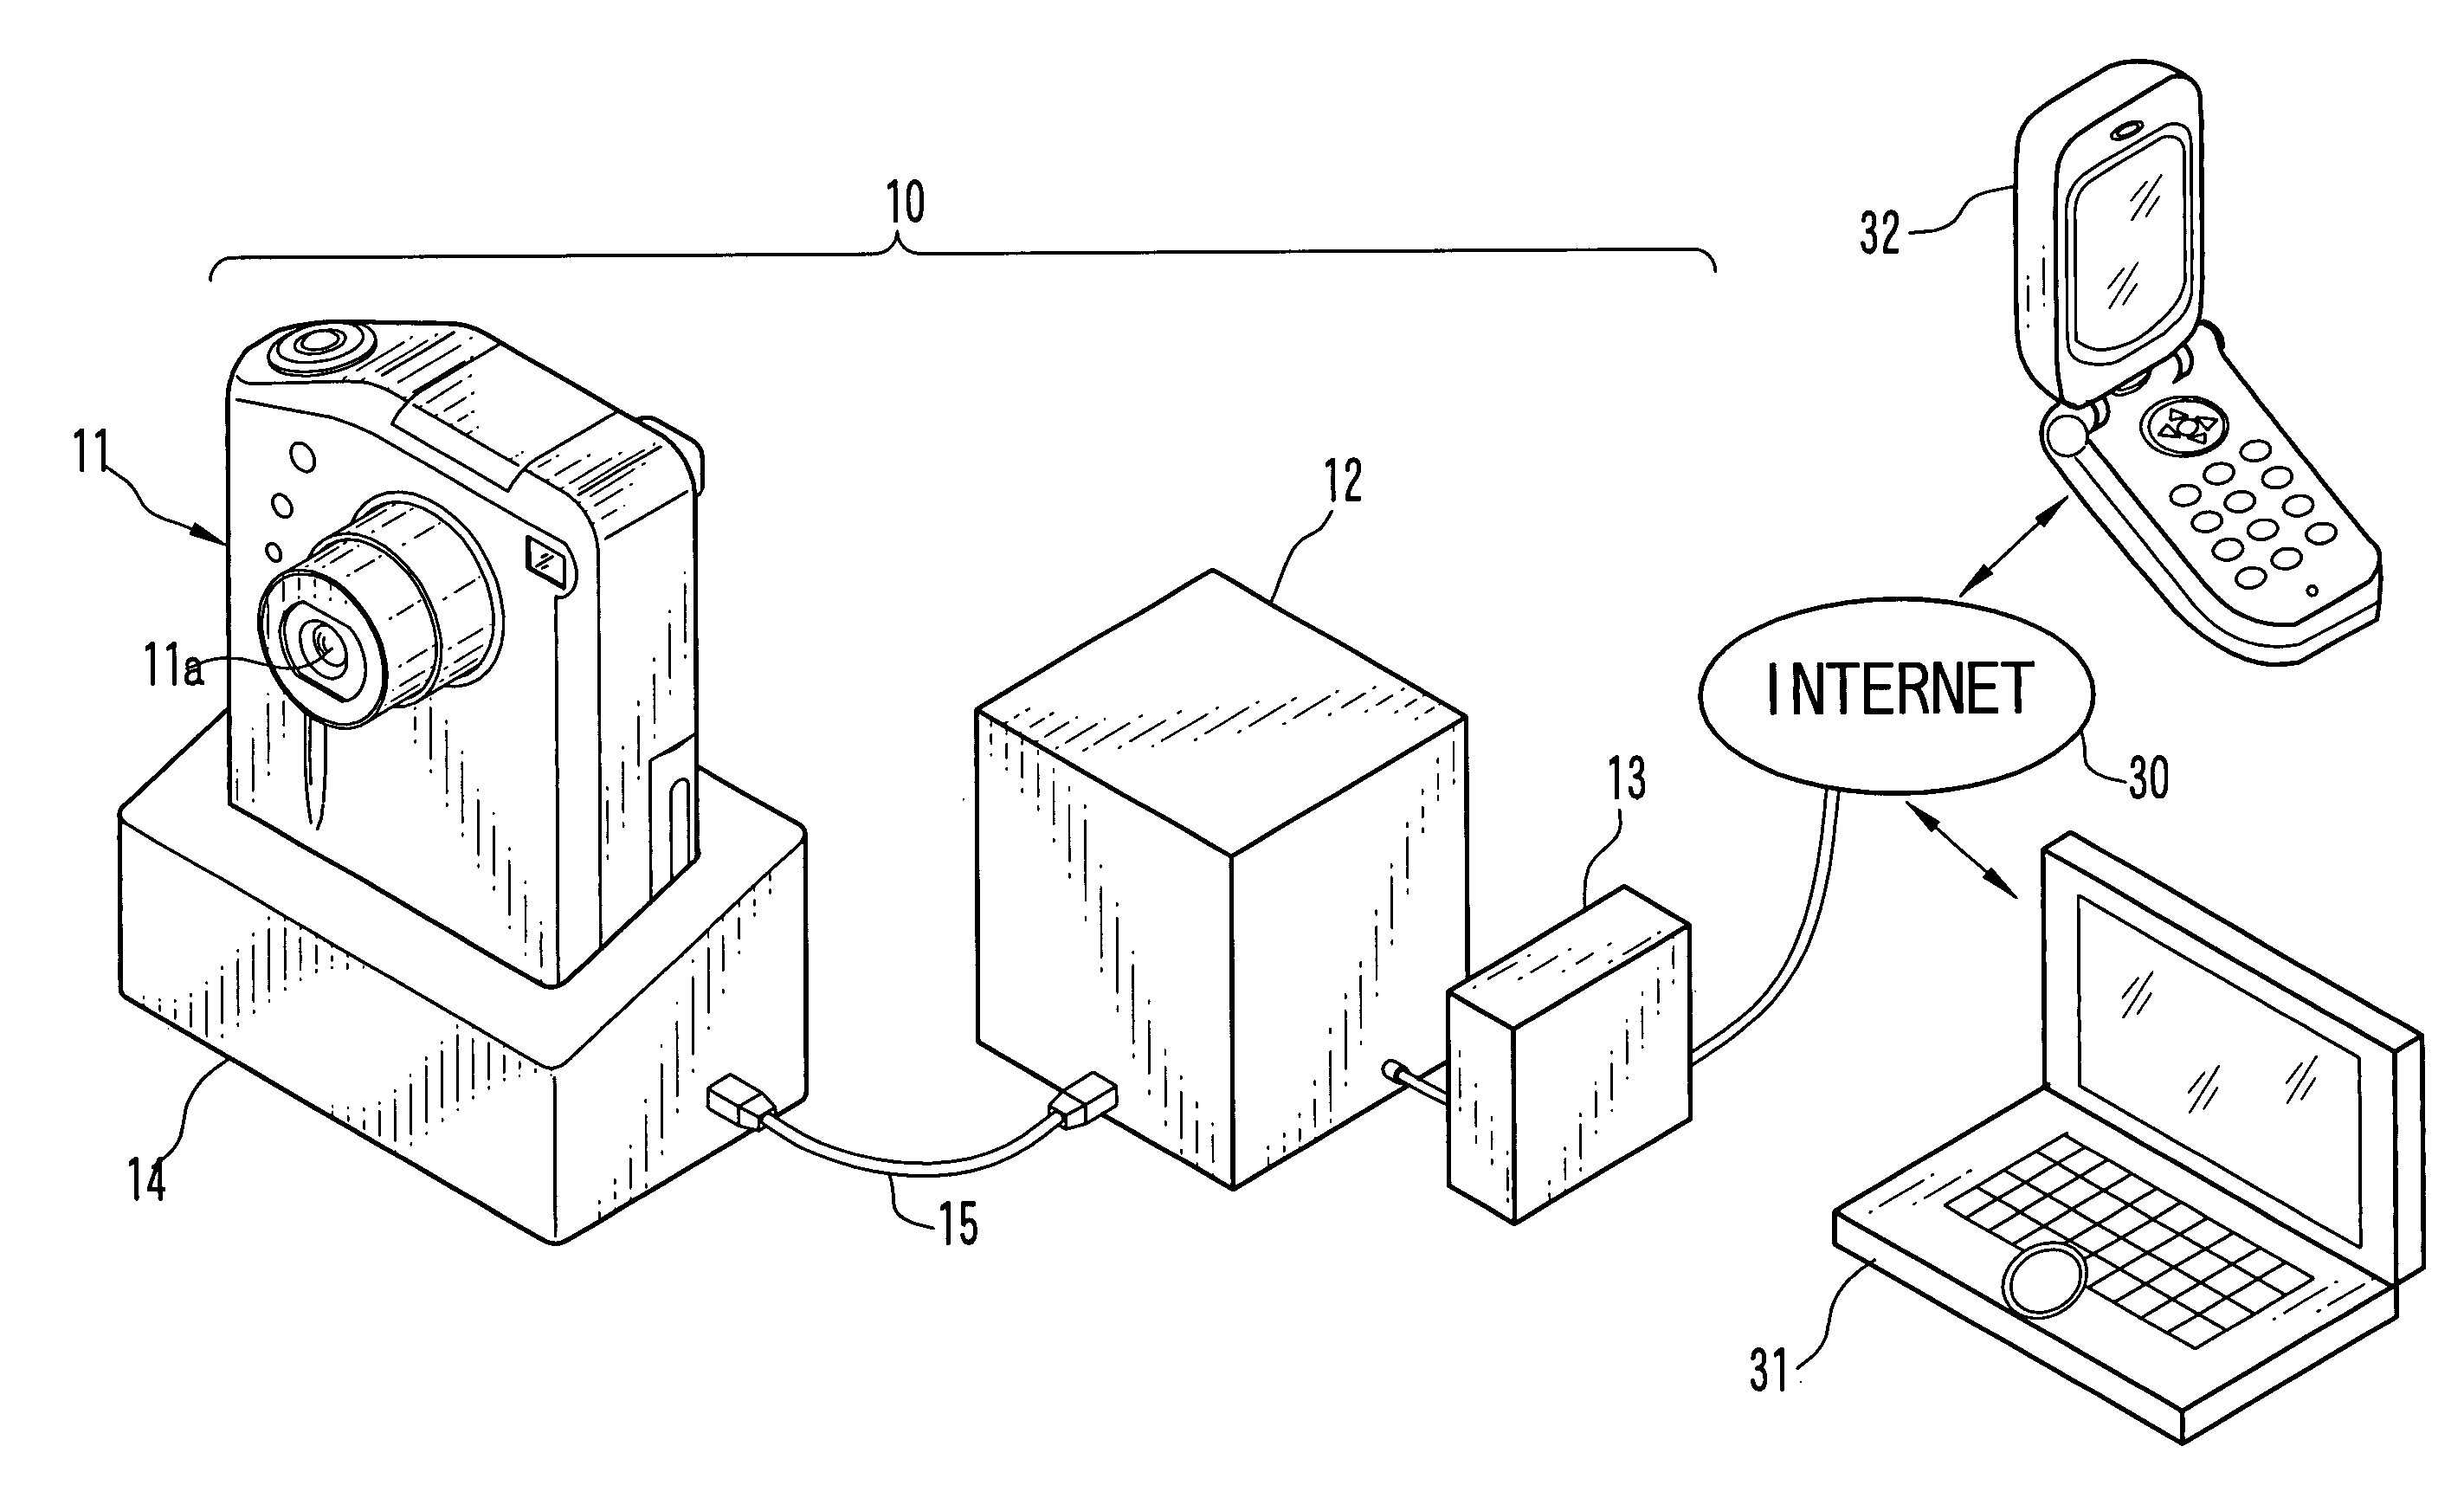 Web camera and method for sending moving image